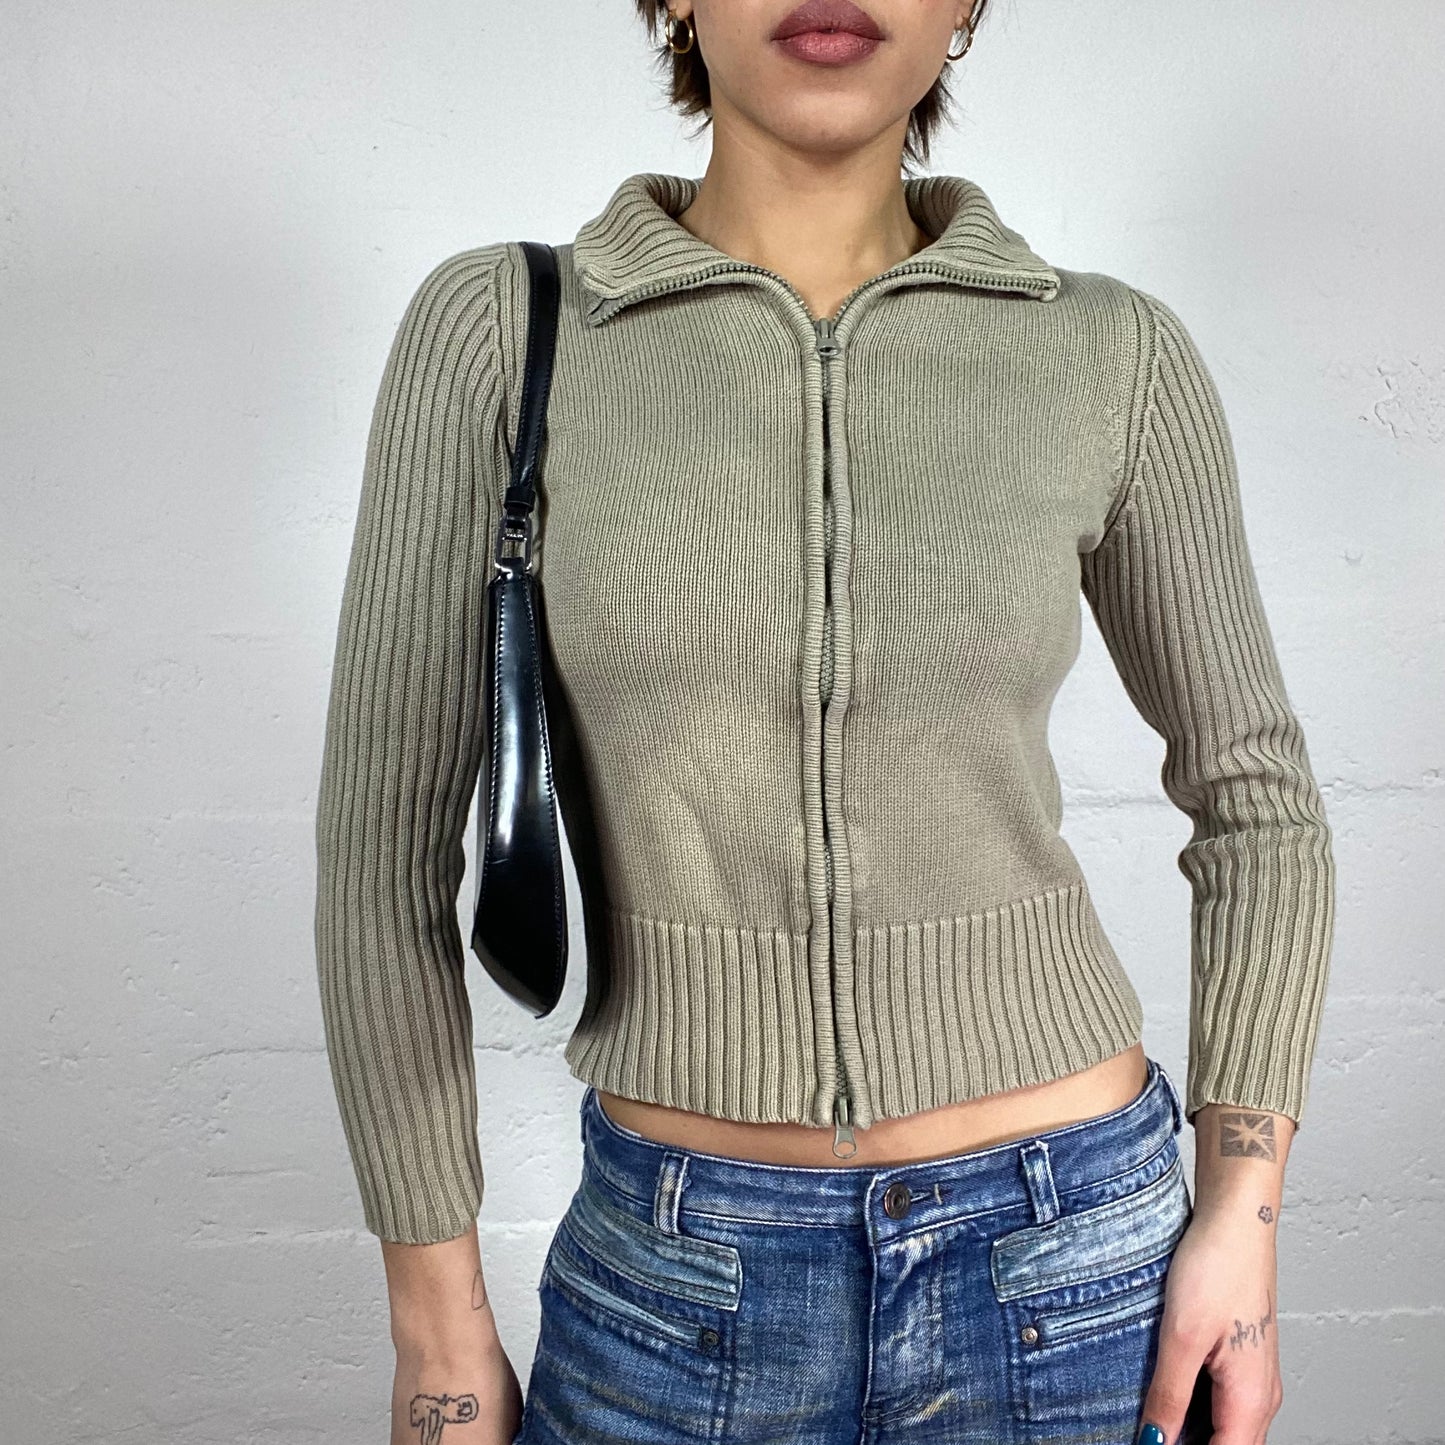 Vintage 2000's Grunge Khaki Zip Up Sweater with Knitted Material (S)